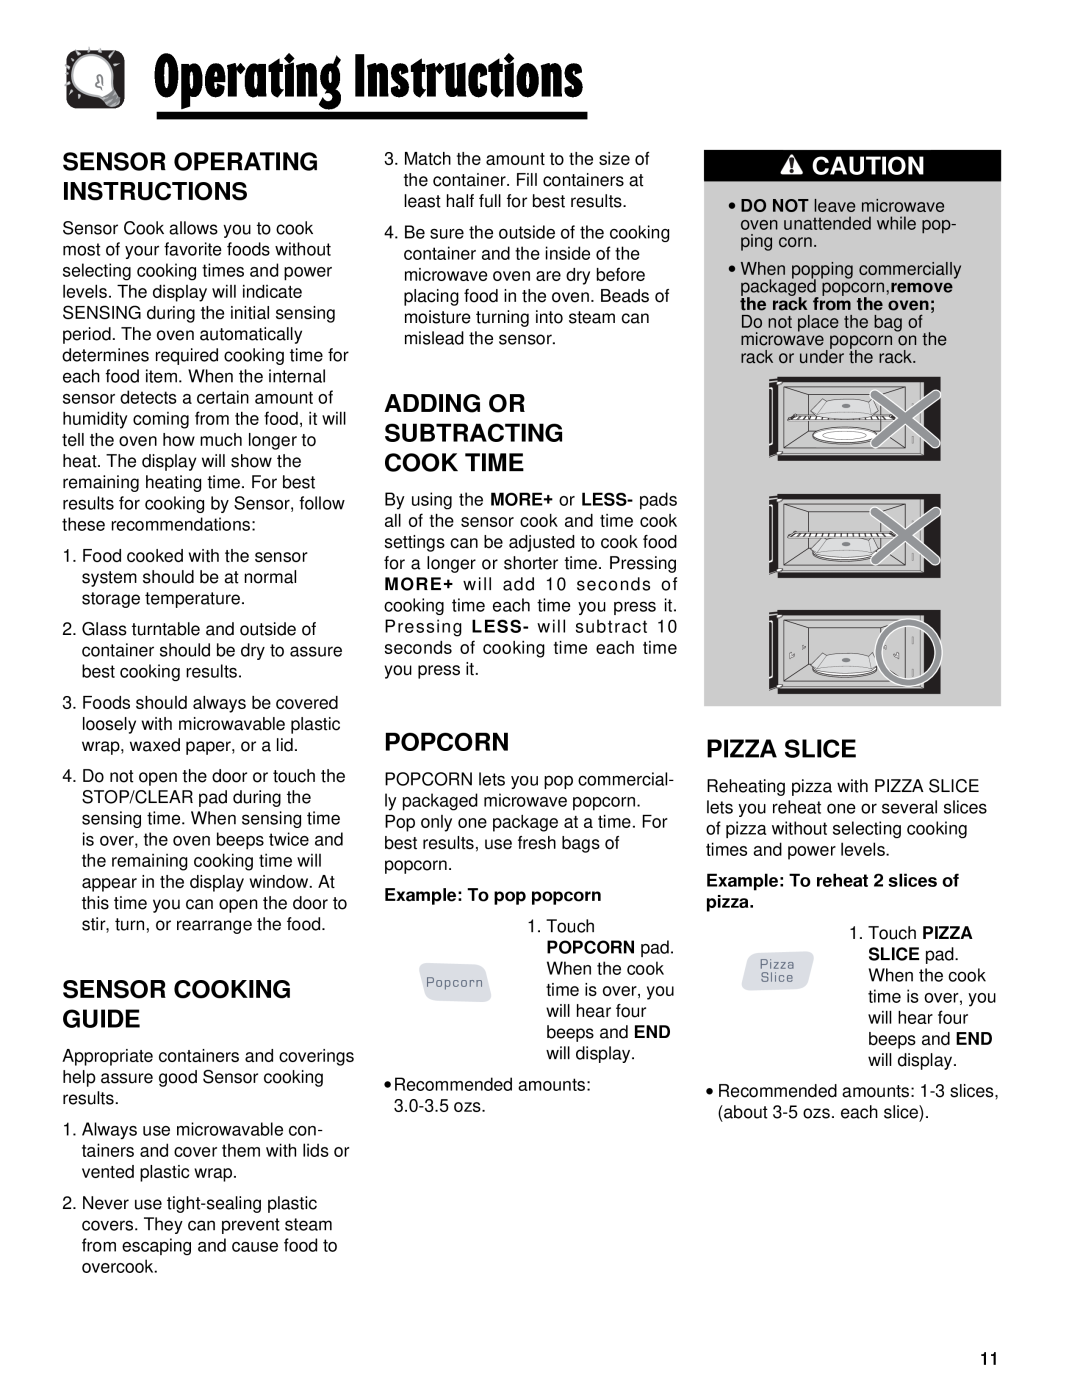 Maytag AMV5164AA, AMV5164AC Sensor Operating Instructions, Sensor Cooking Guide, Adding Or Subtracting Cook Time, Popcorn 